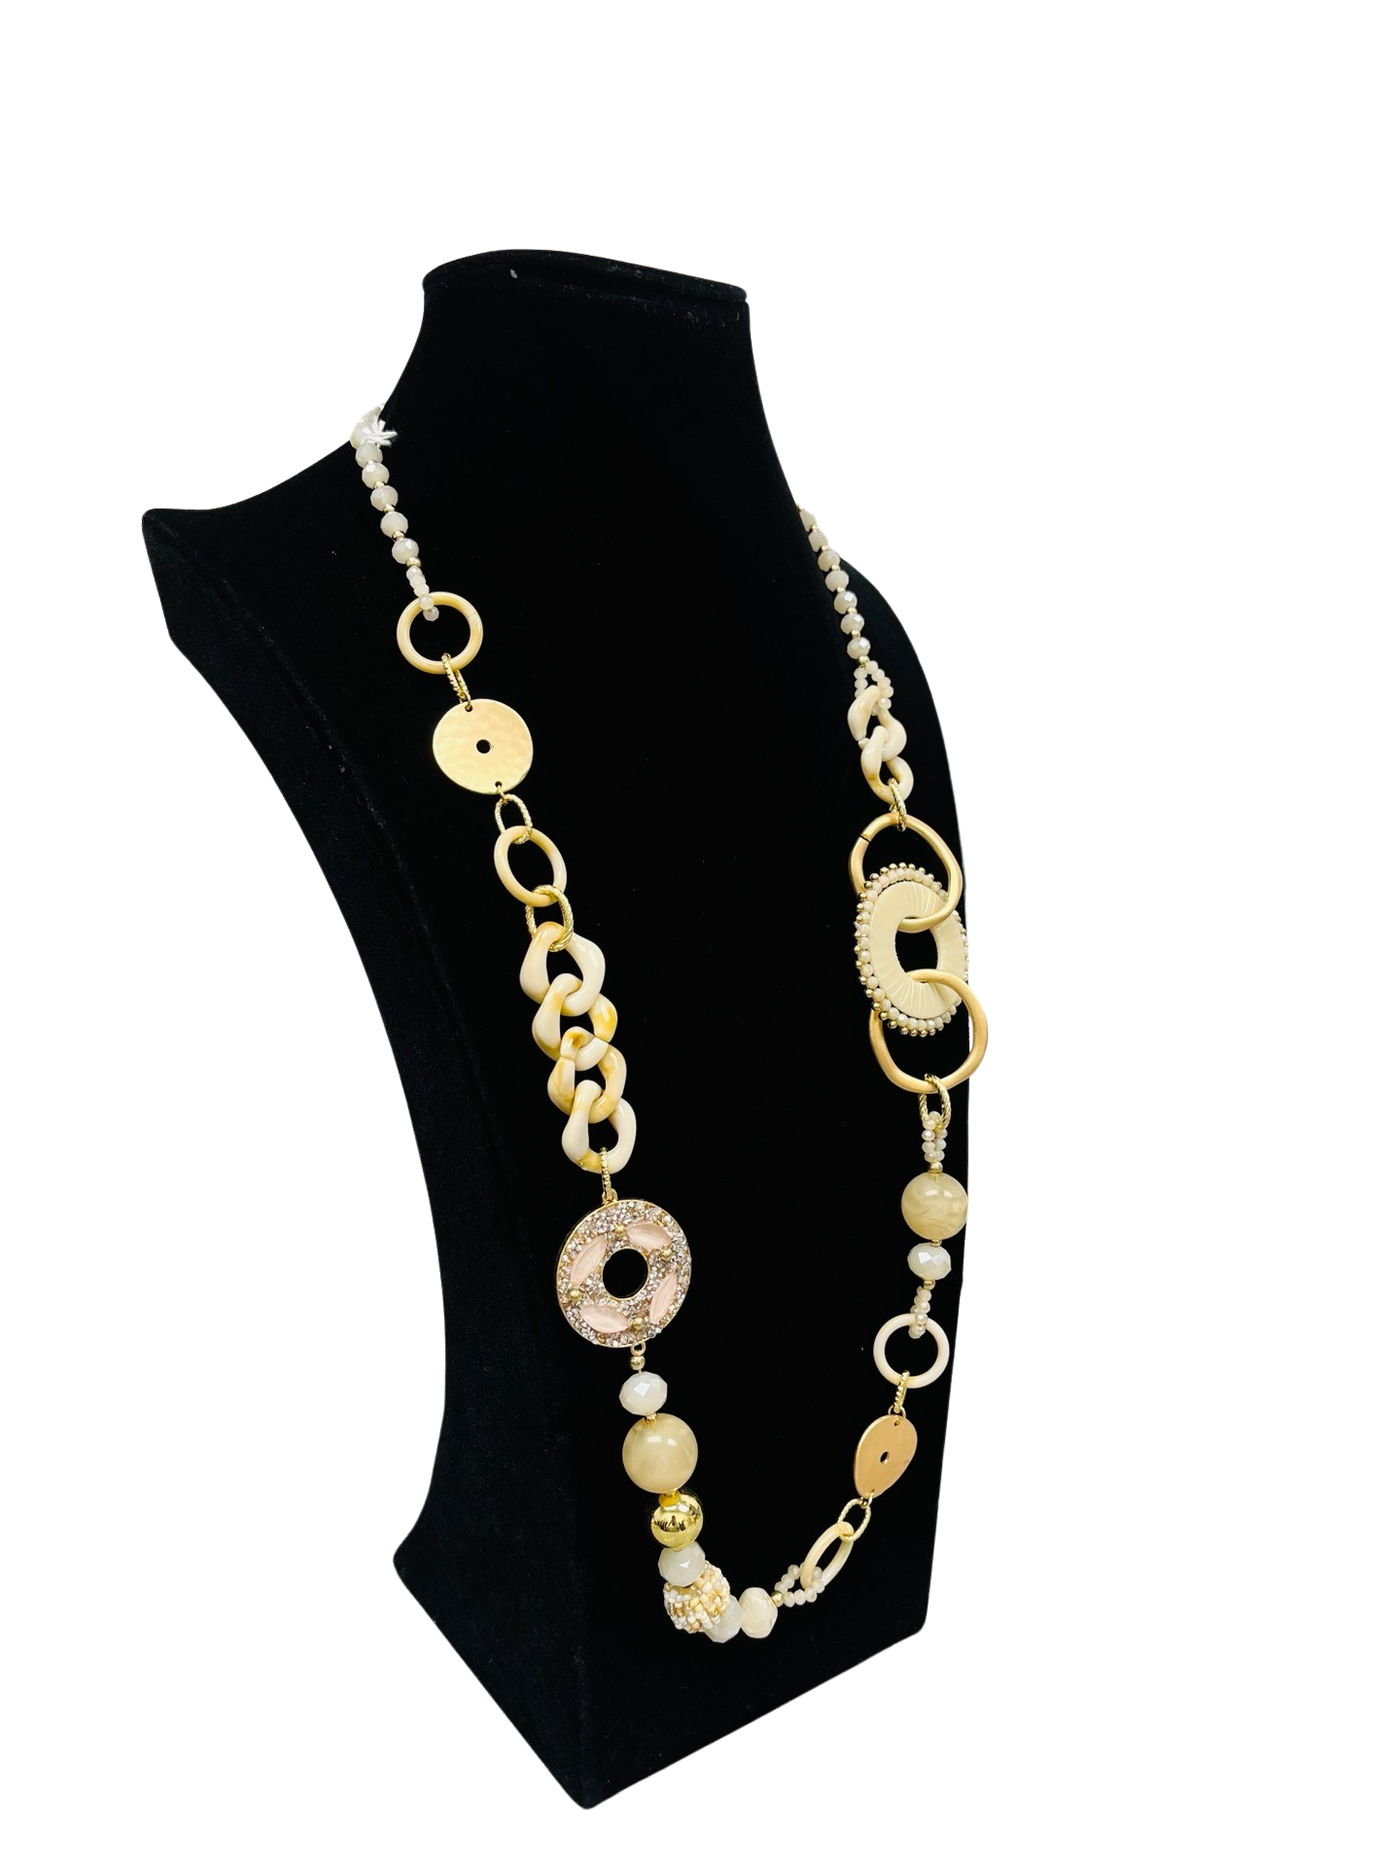 Cream & Gold Long Statement Necklace